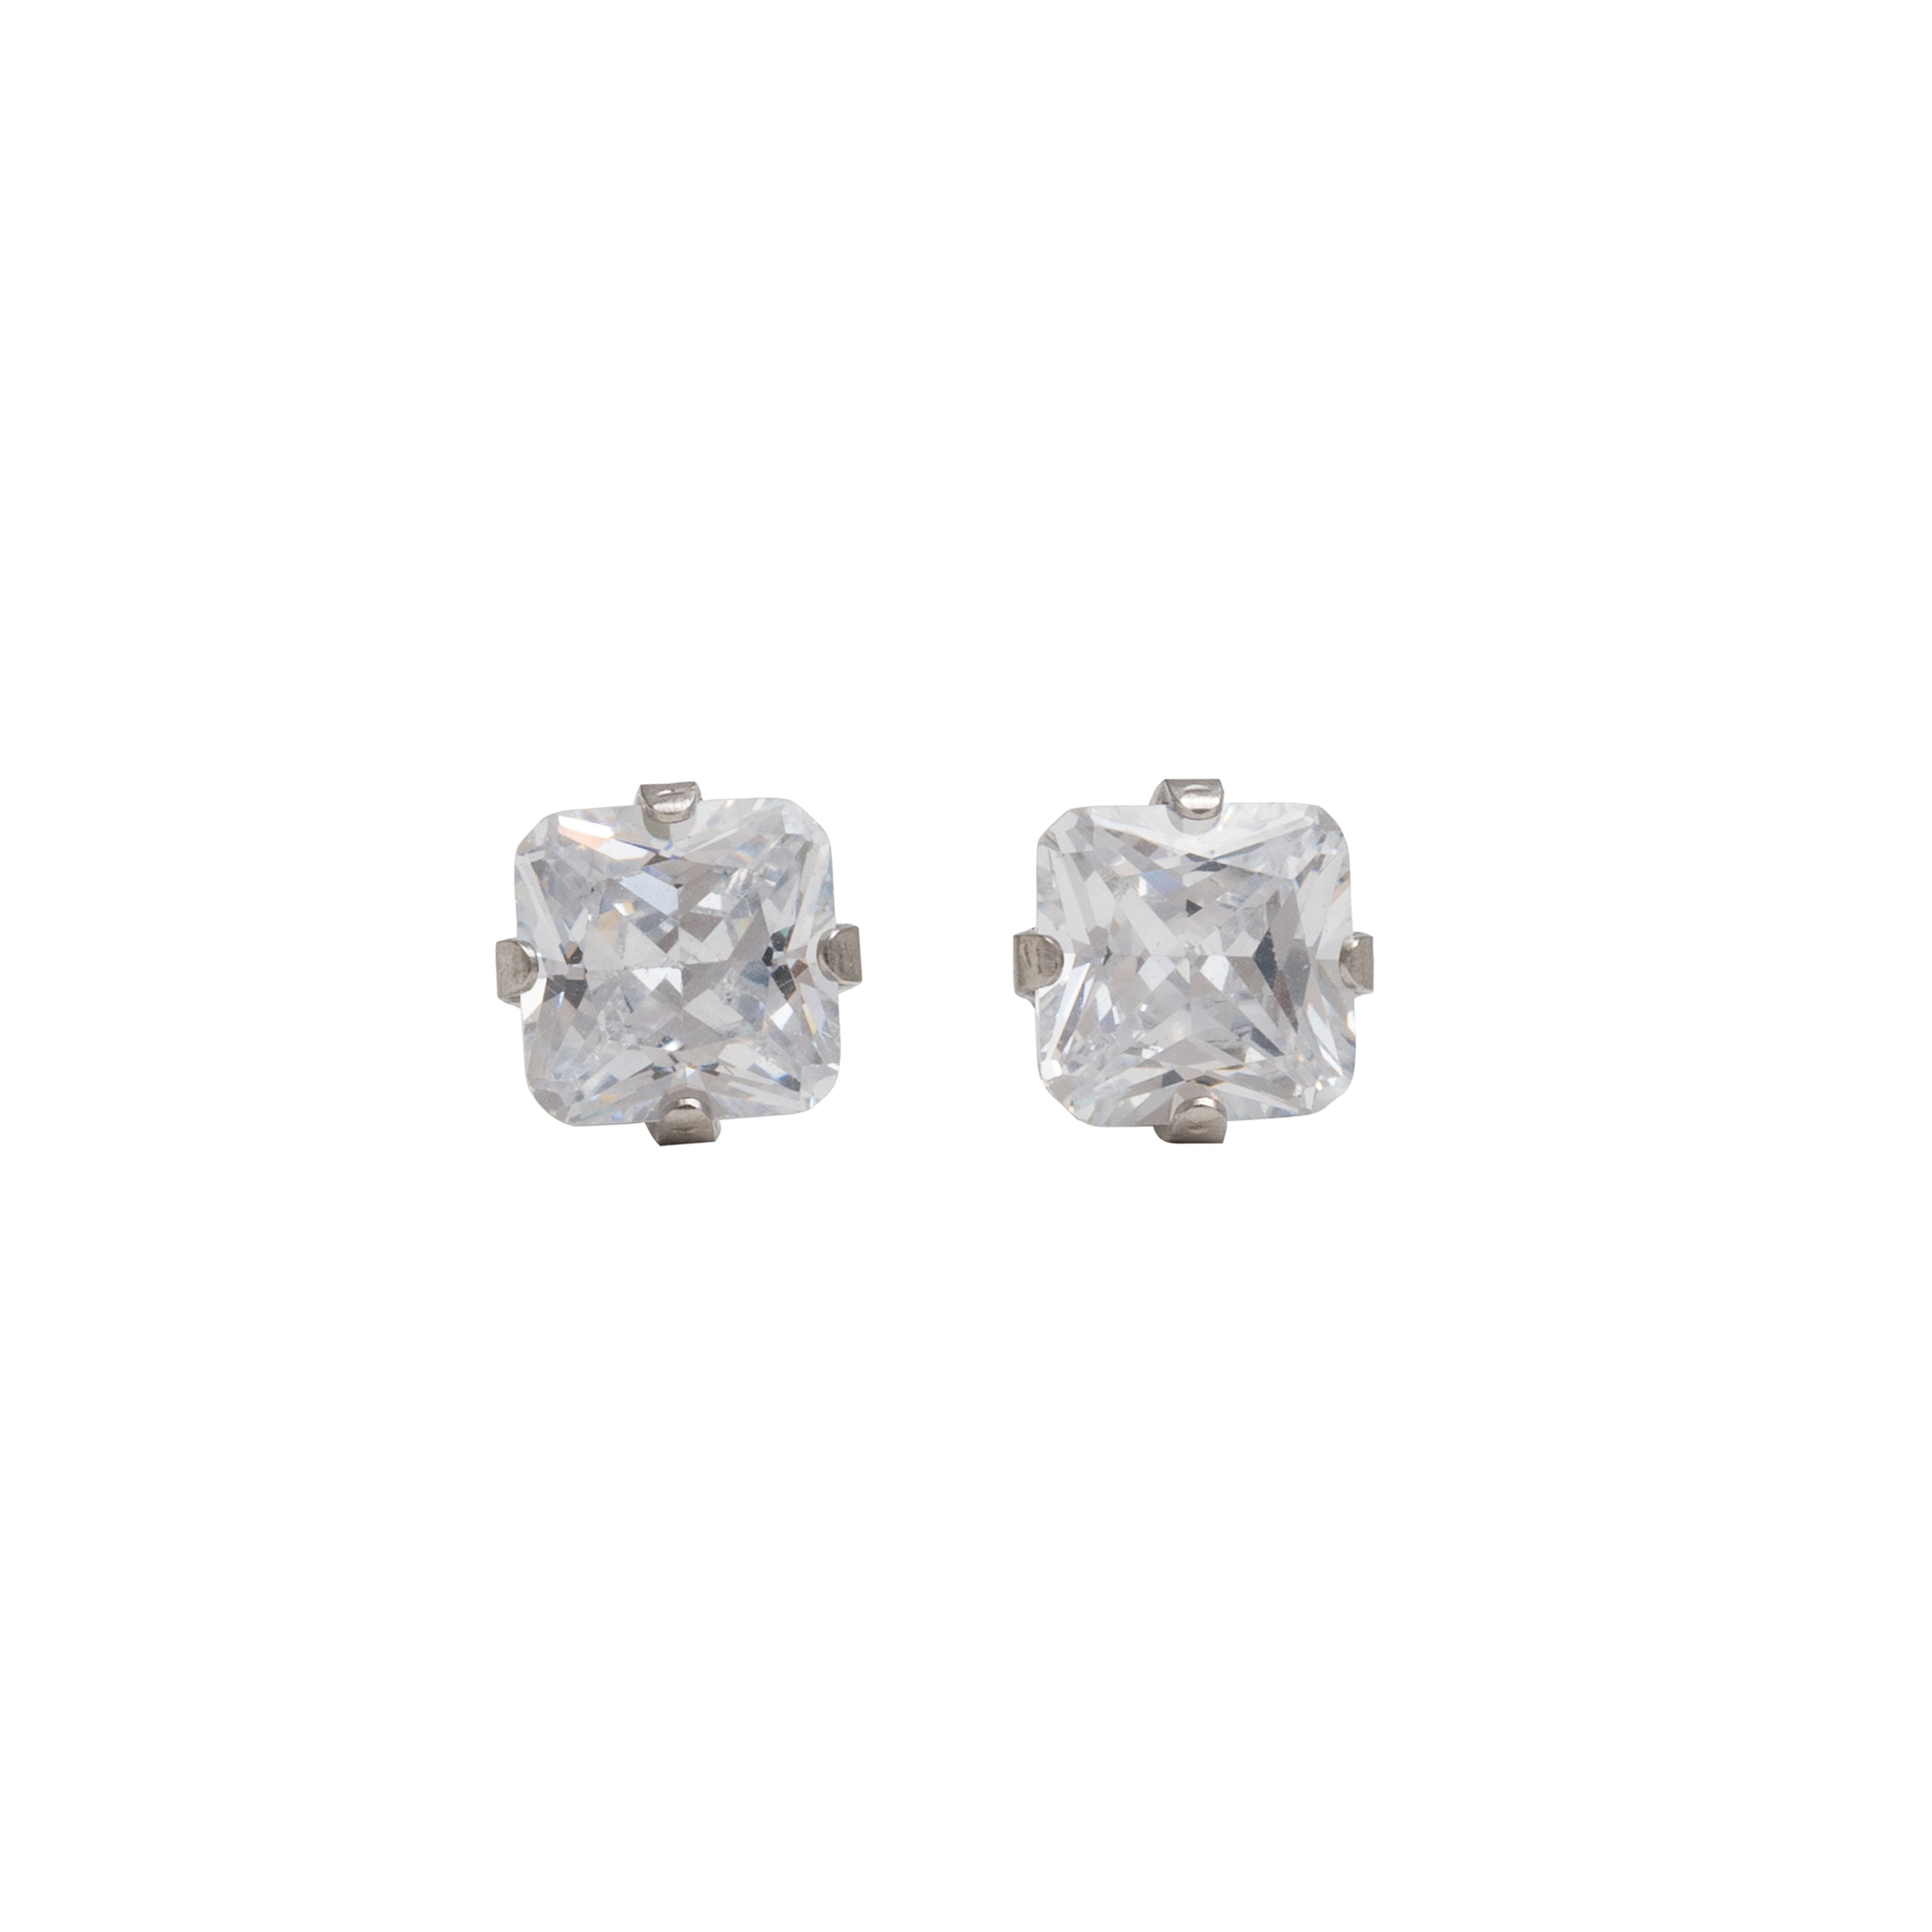 6*6MM - Cubic Zirconia (Square) - Crystal Clear | Stainless Steel Simple Yet Stylish, Cute & Trending Fashion Earrings / Ear Studs for Girls & Women Online @ Pakistan | Studex Sensitive (for daily wear)